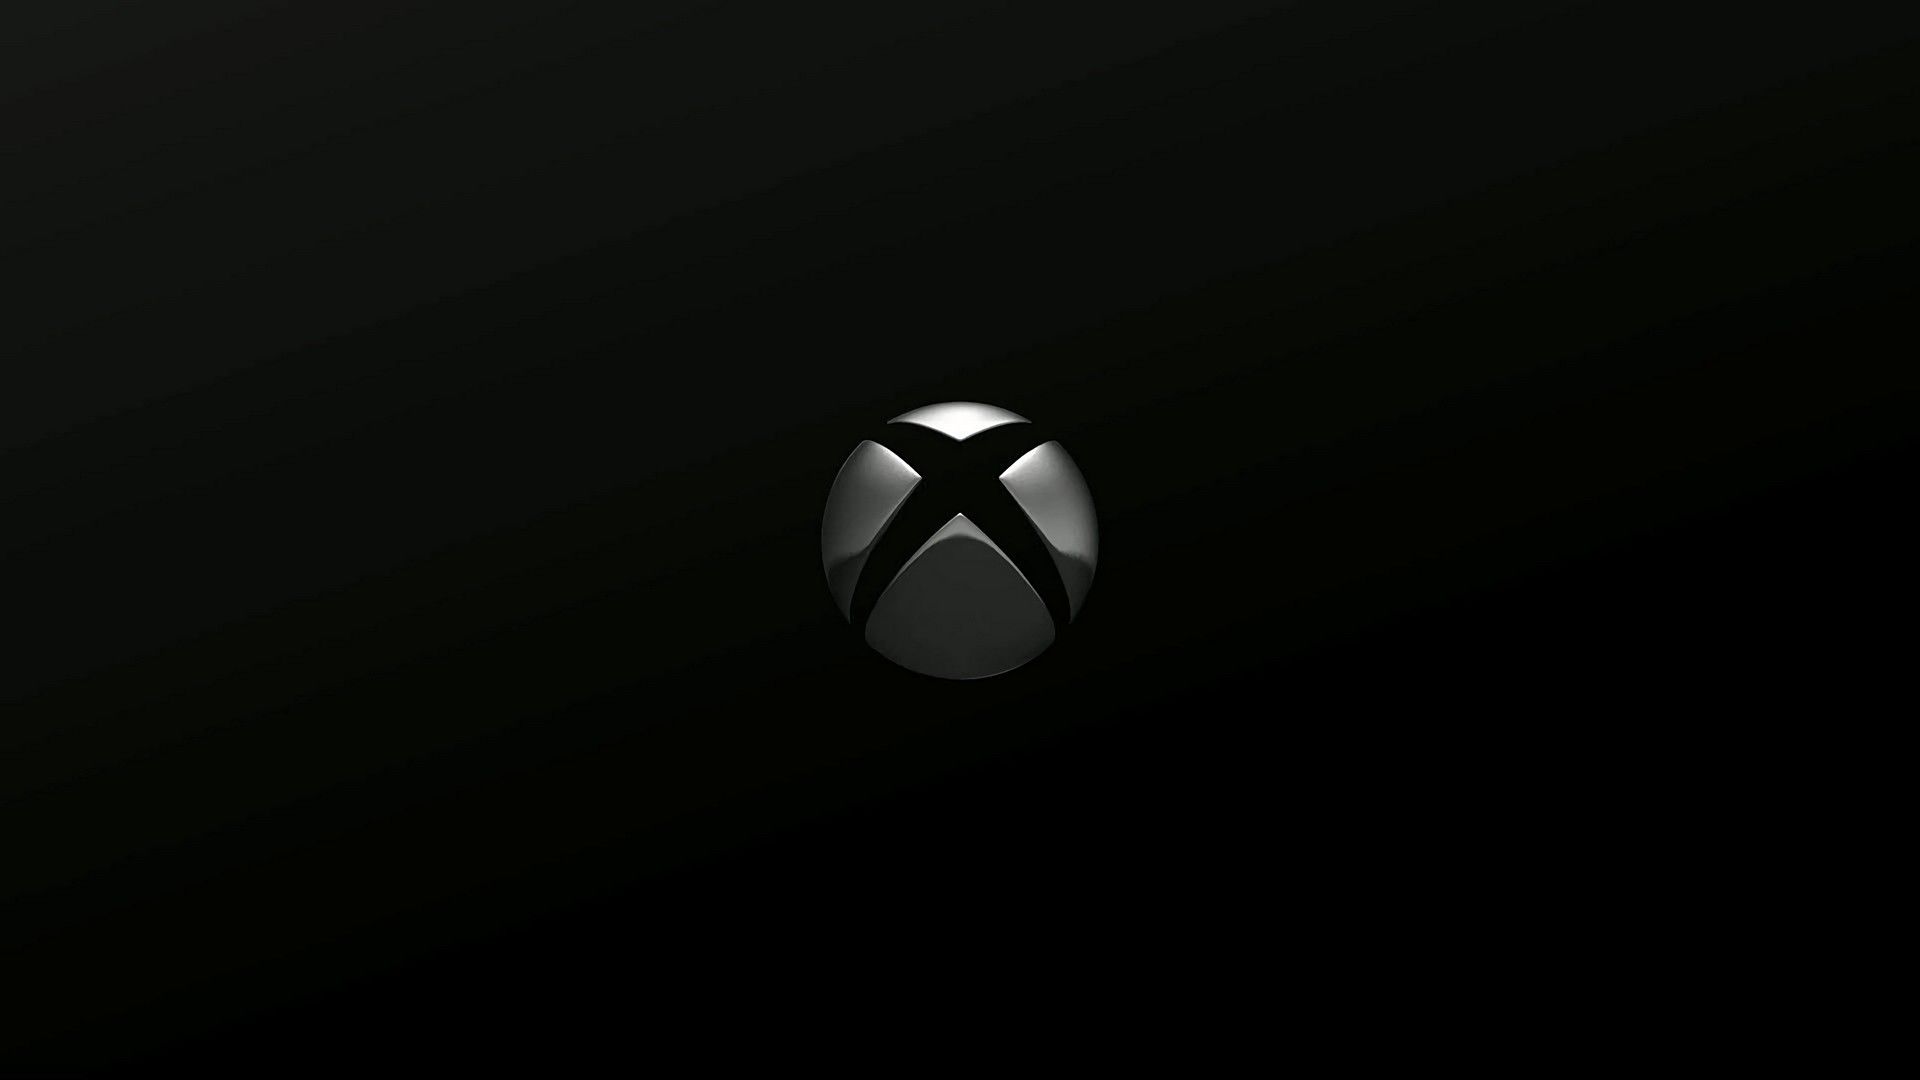 Xbox Games Showcase Could Be Coming Soon